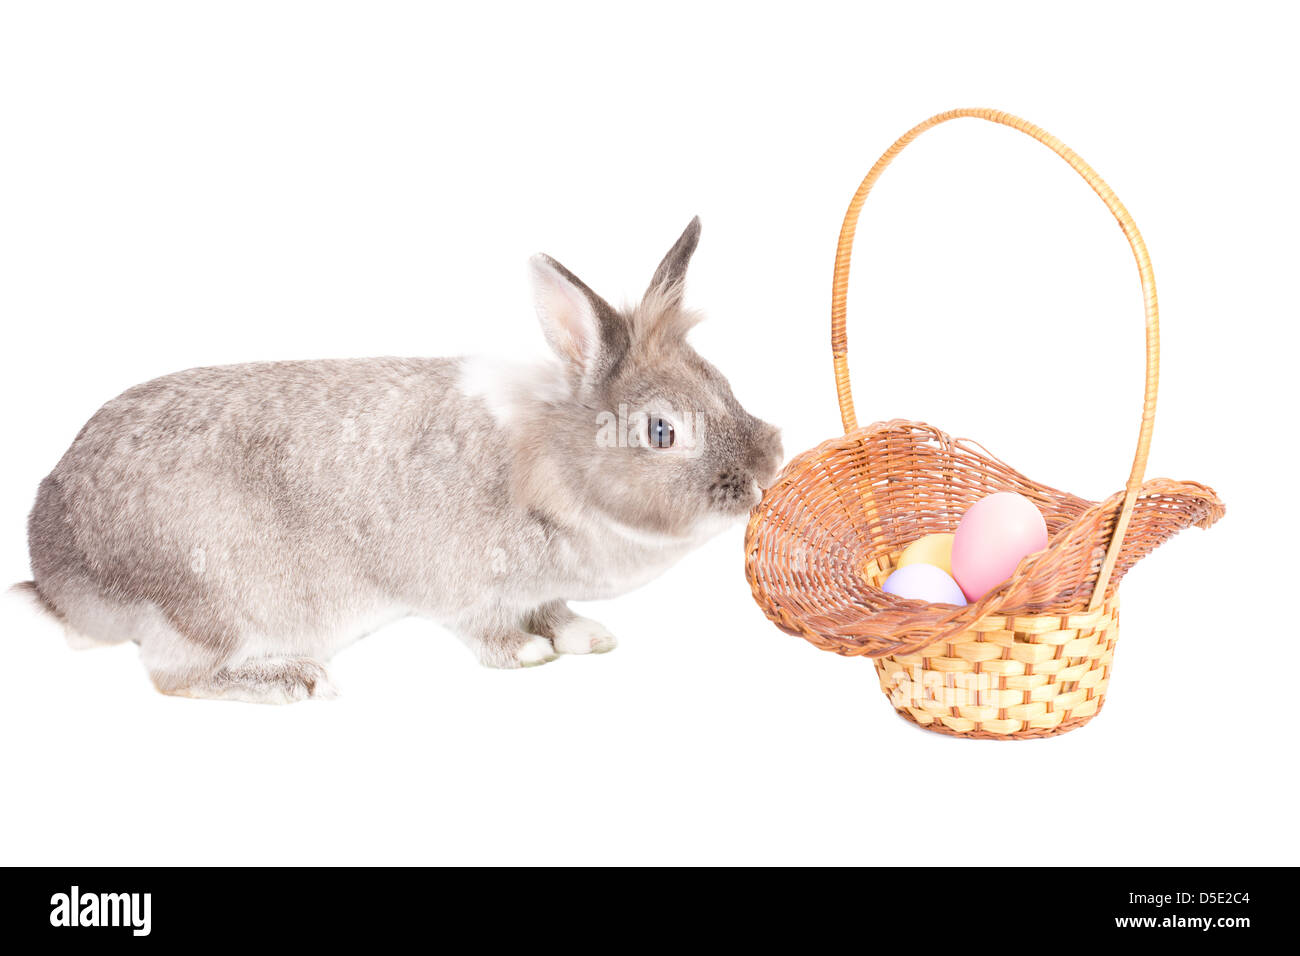 Adorable little furry grey Easter Bunny with a decorative wicker basket filled with traditional colourful painted Easter Eggs isolated on white with copyspace for your greeting. Stock Photo